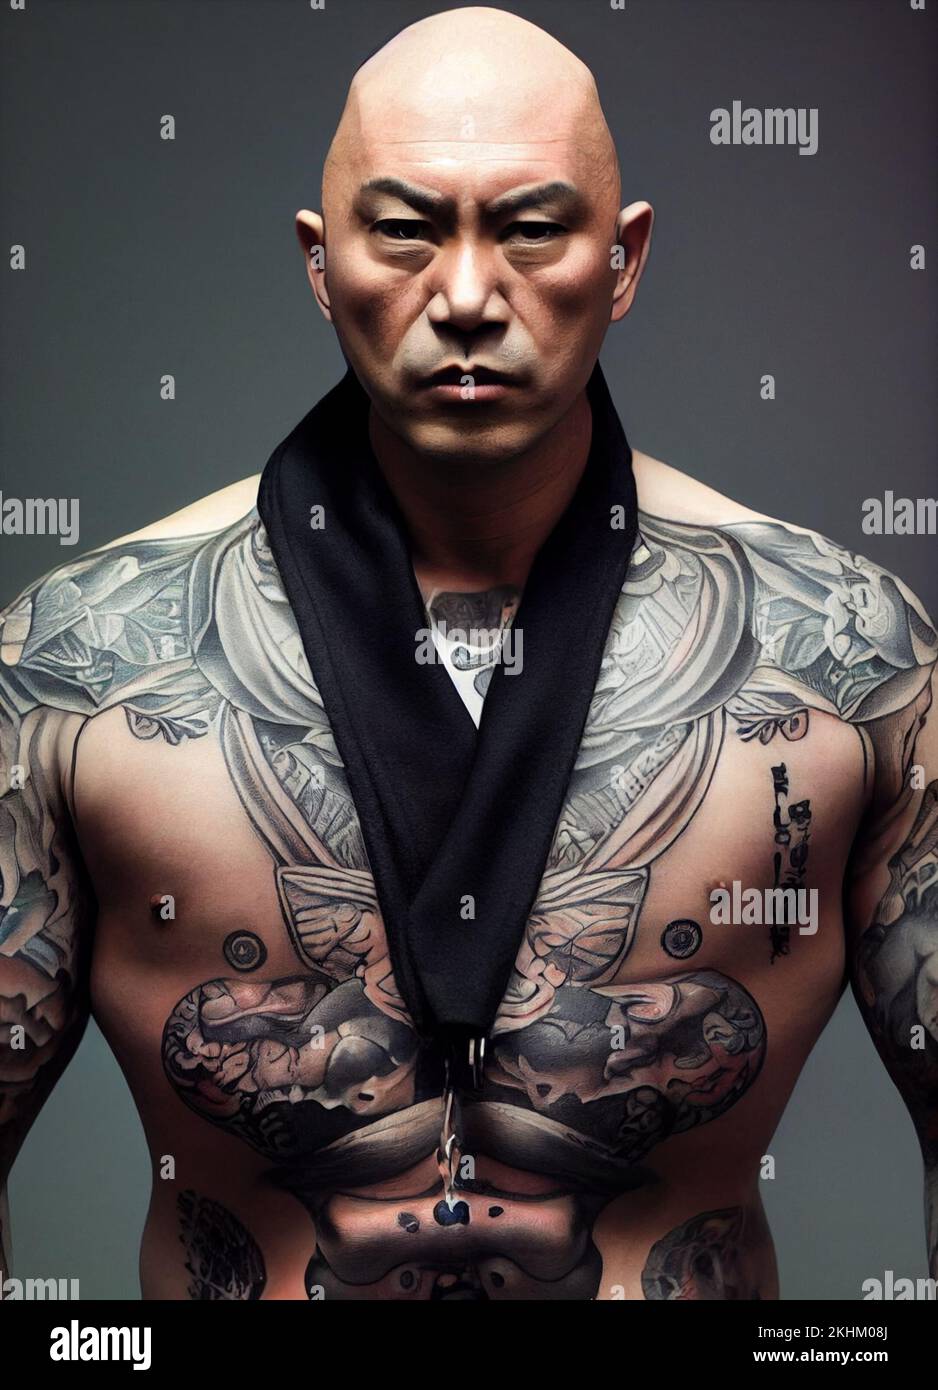 Aggregate more than 79 japanese criminal tattoos latest - in.coedo.com.vn